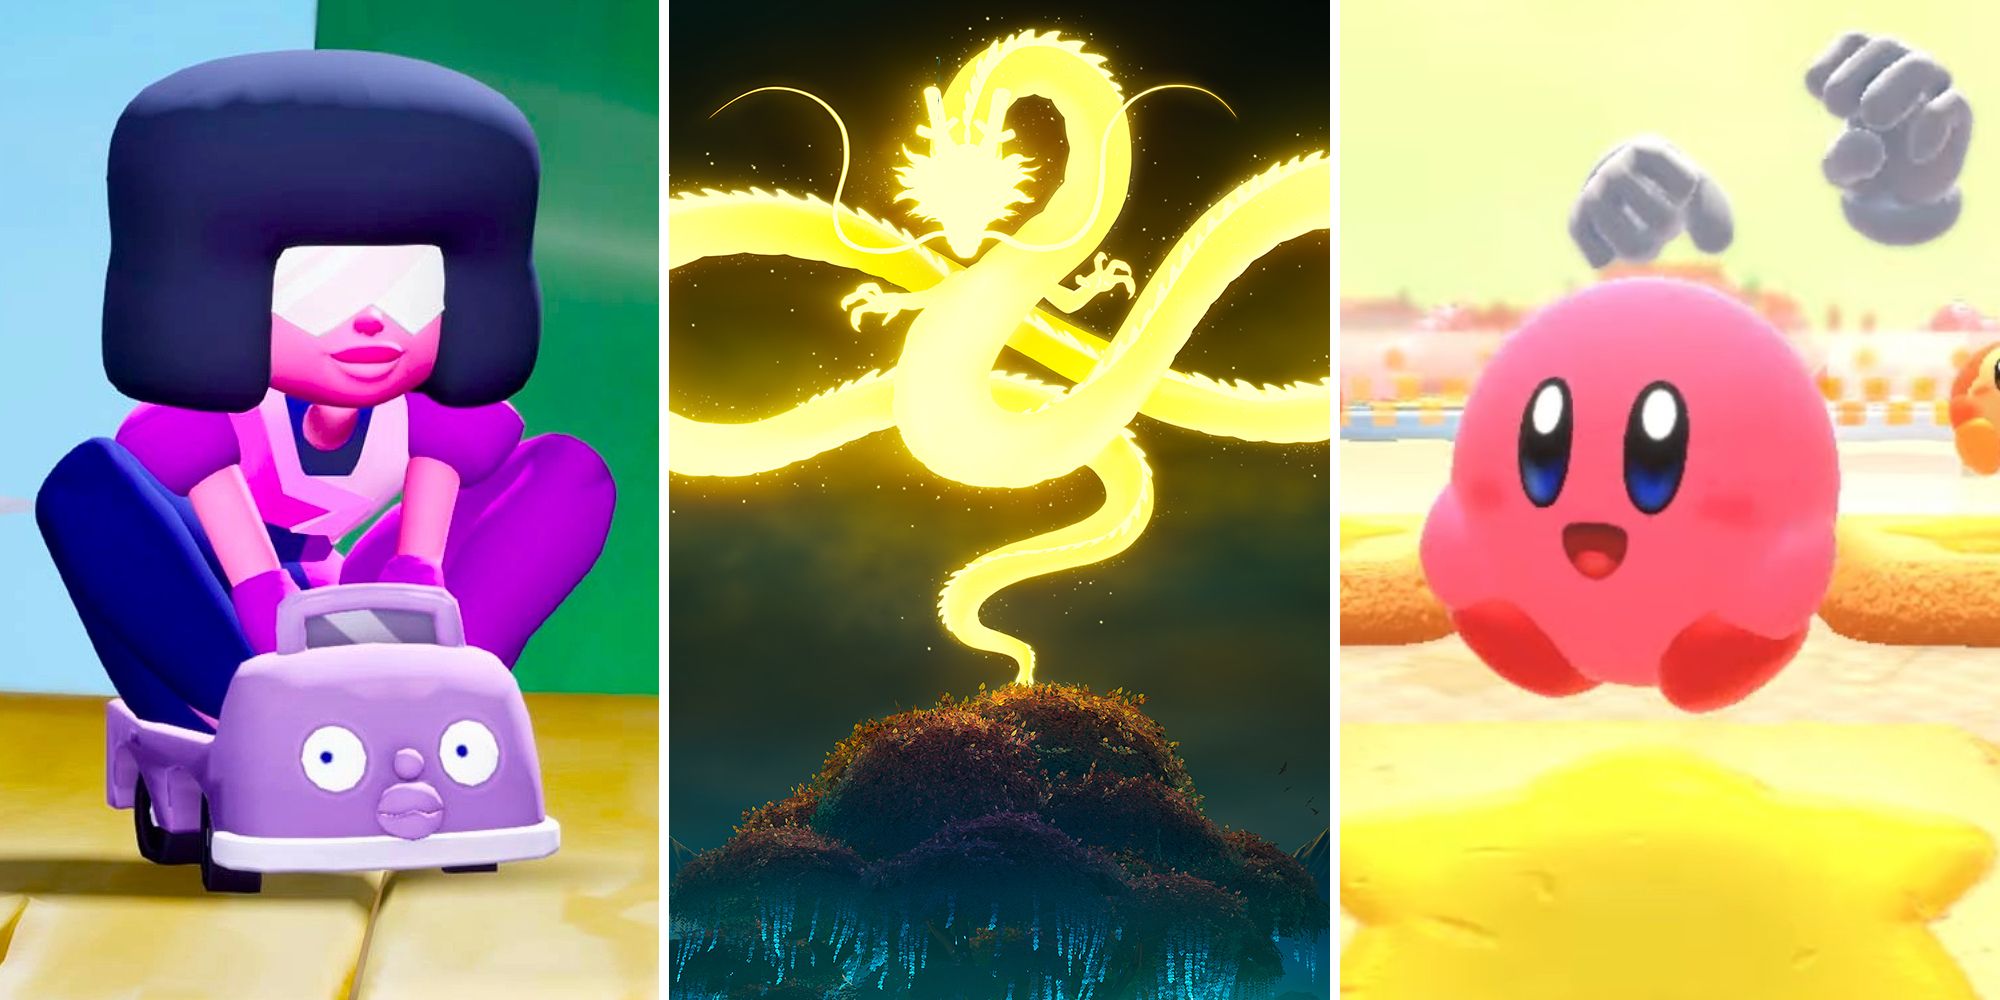 Garnet in MultiVersus, a glowing yellow dragon, and Kirby